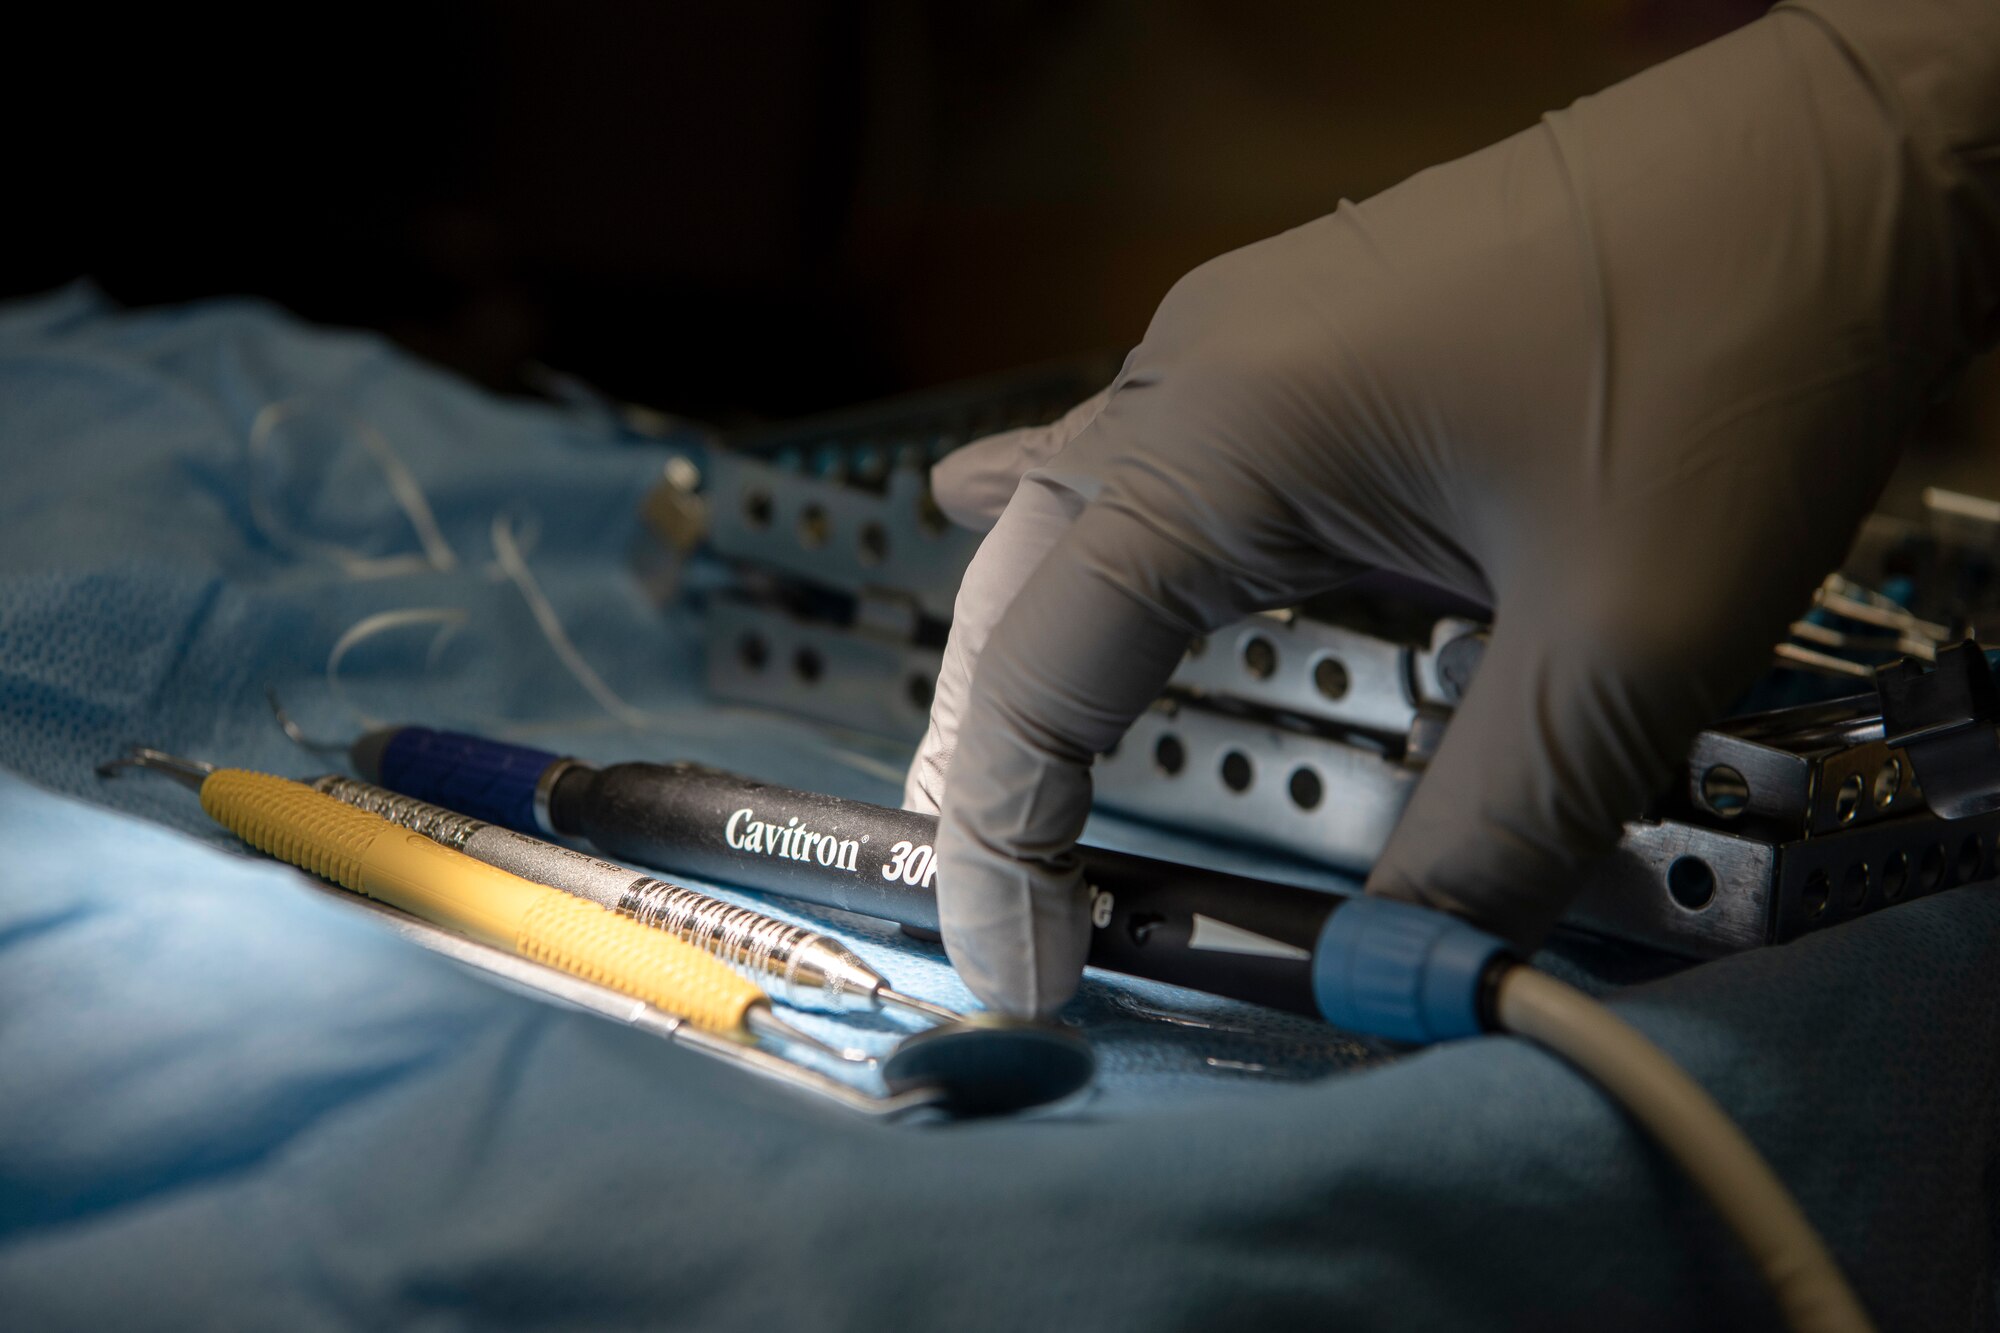 U.S. Air Force Senior Airman Courtney Lott, a 35th Dental Squadron dental technician, reaches for a Cavitron Steri-Mate Detachable Serializable Handpiece before performing a dental cleaning at Misawa Air Base, Japan, Aug. 17, 2018. Lott a single mother, said being in the service gives her much more than just trade skills in dentistry, but also gives her and her son financial stability. (U.S. Air Force photo by Airman 1st Class Collette Brooks)